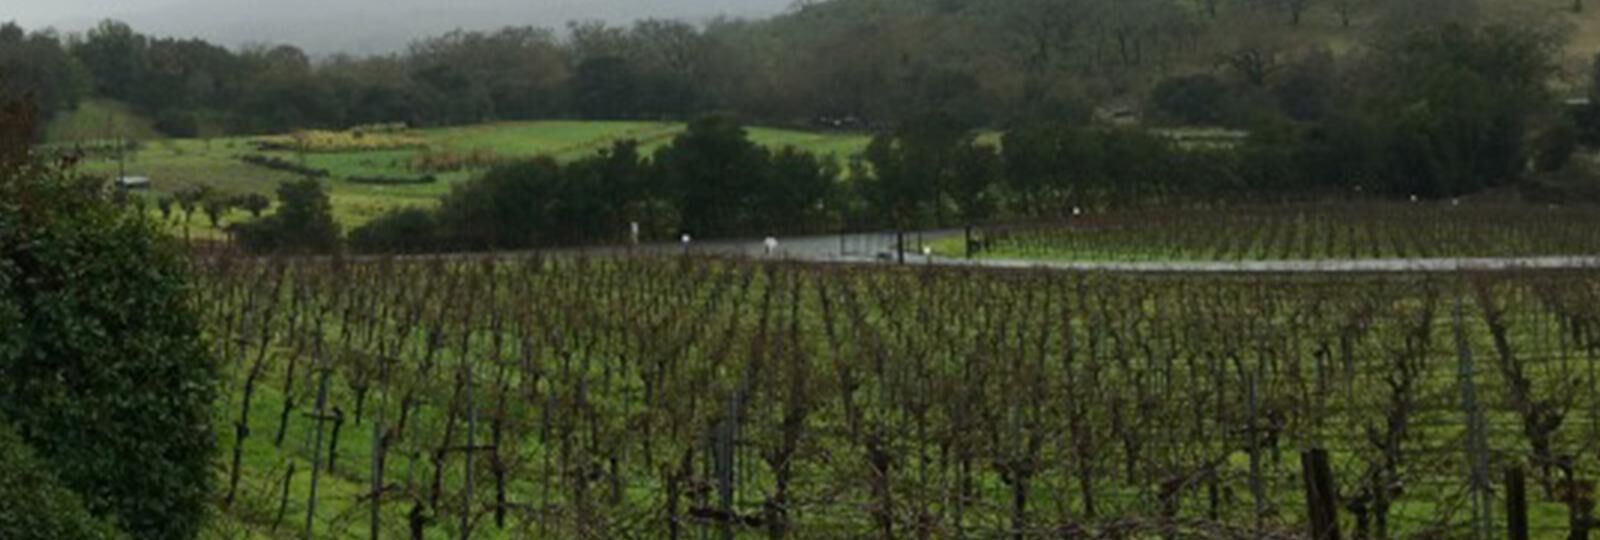 FROM DROUGHT TO EL NIÑO - WATER IMPACT IN THE VINEYARDS